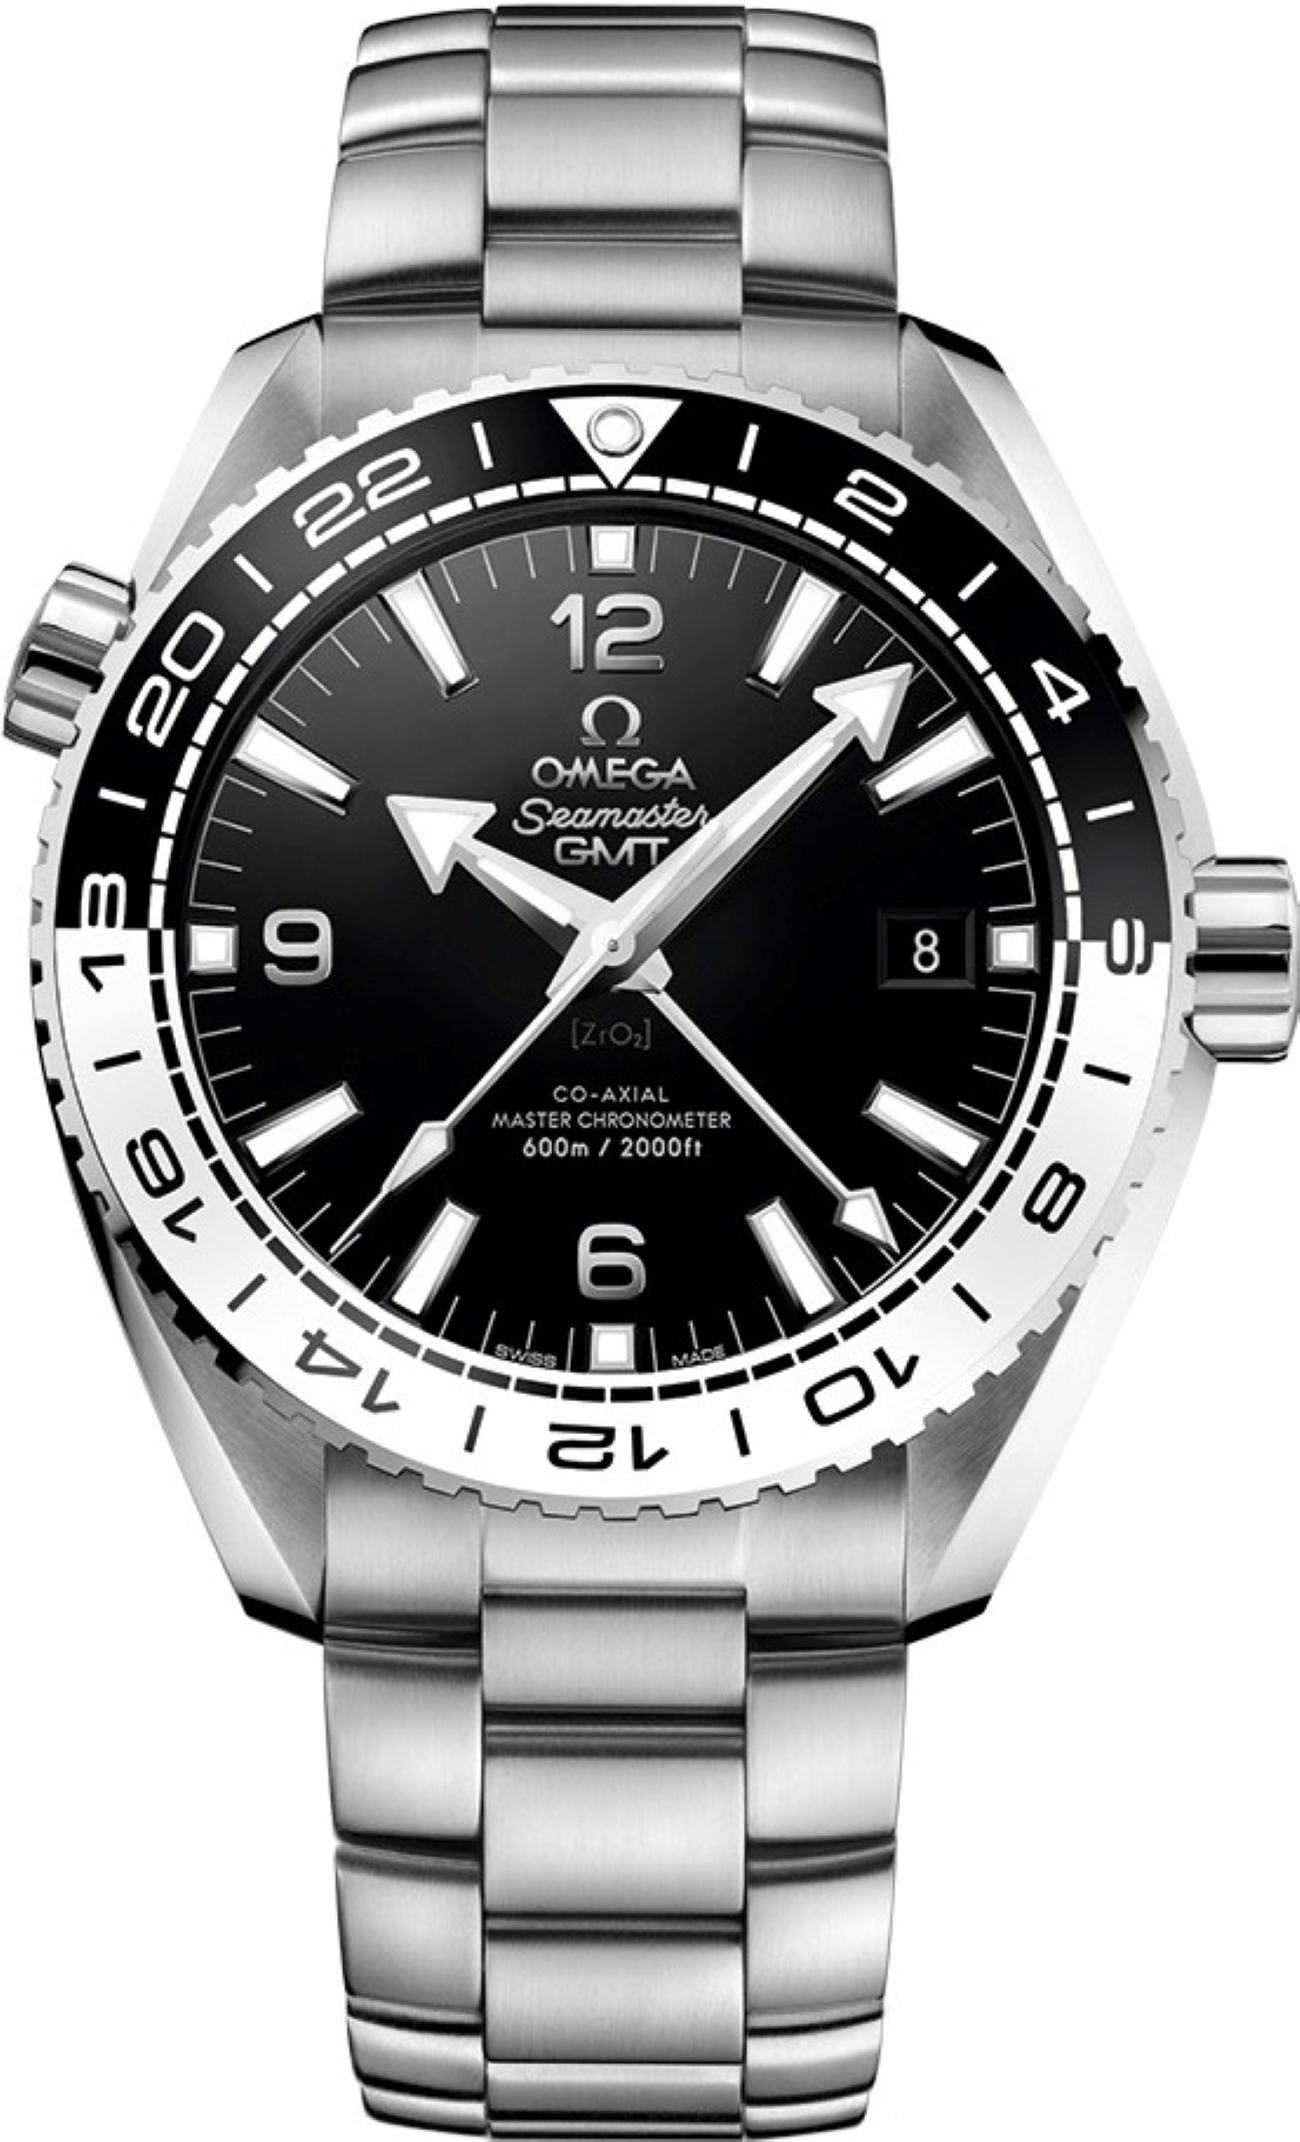 OMEGA SEAMASTER PLANET OCEAN 39.5MM STEEL AUTOMATIC REF: 215.30.44.22.01.001